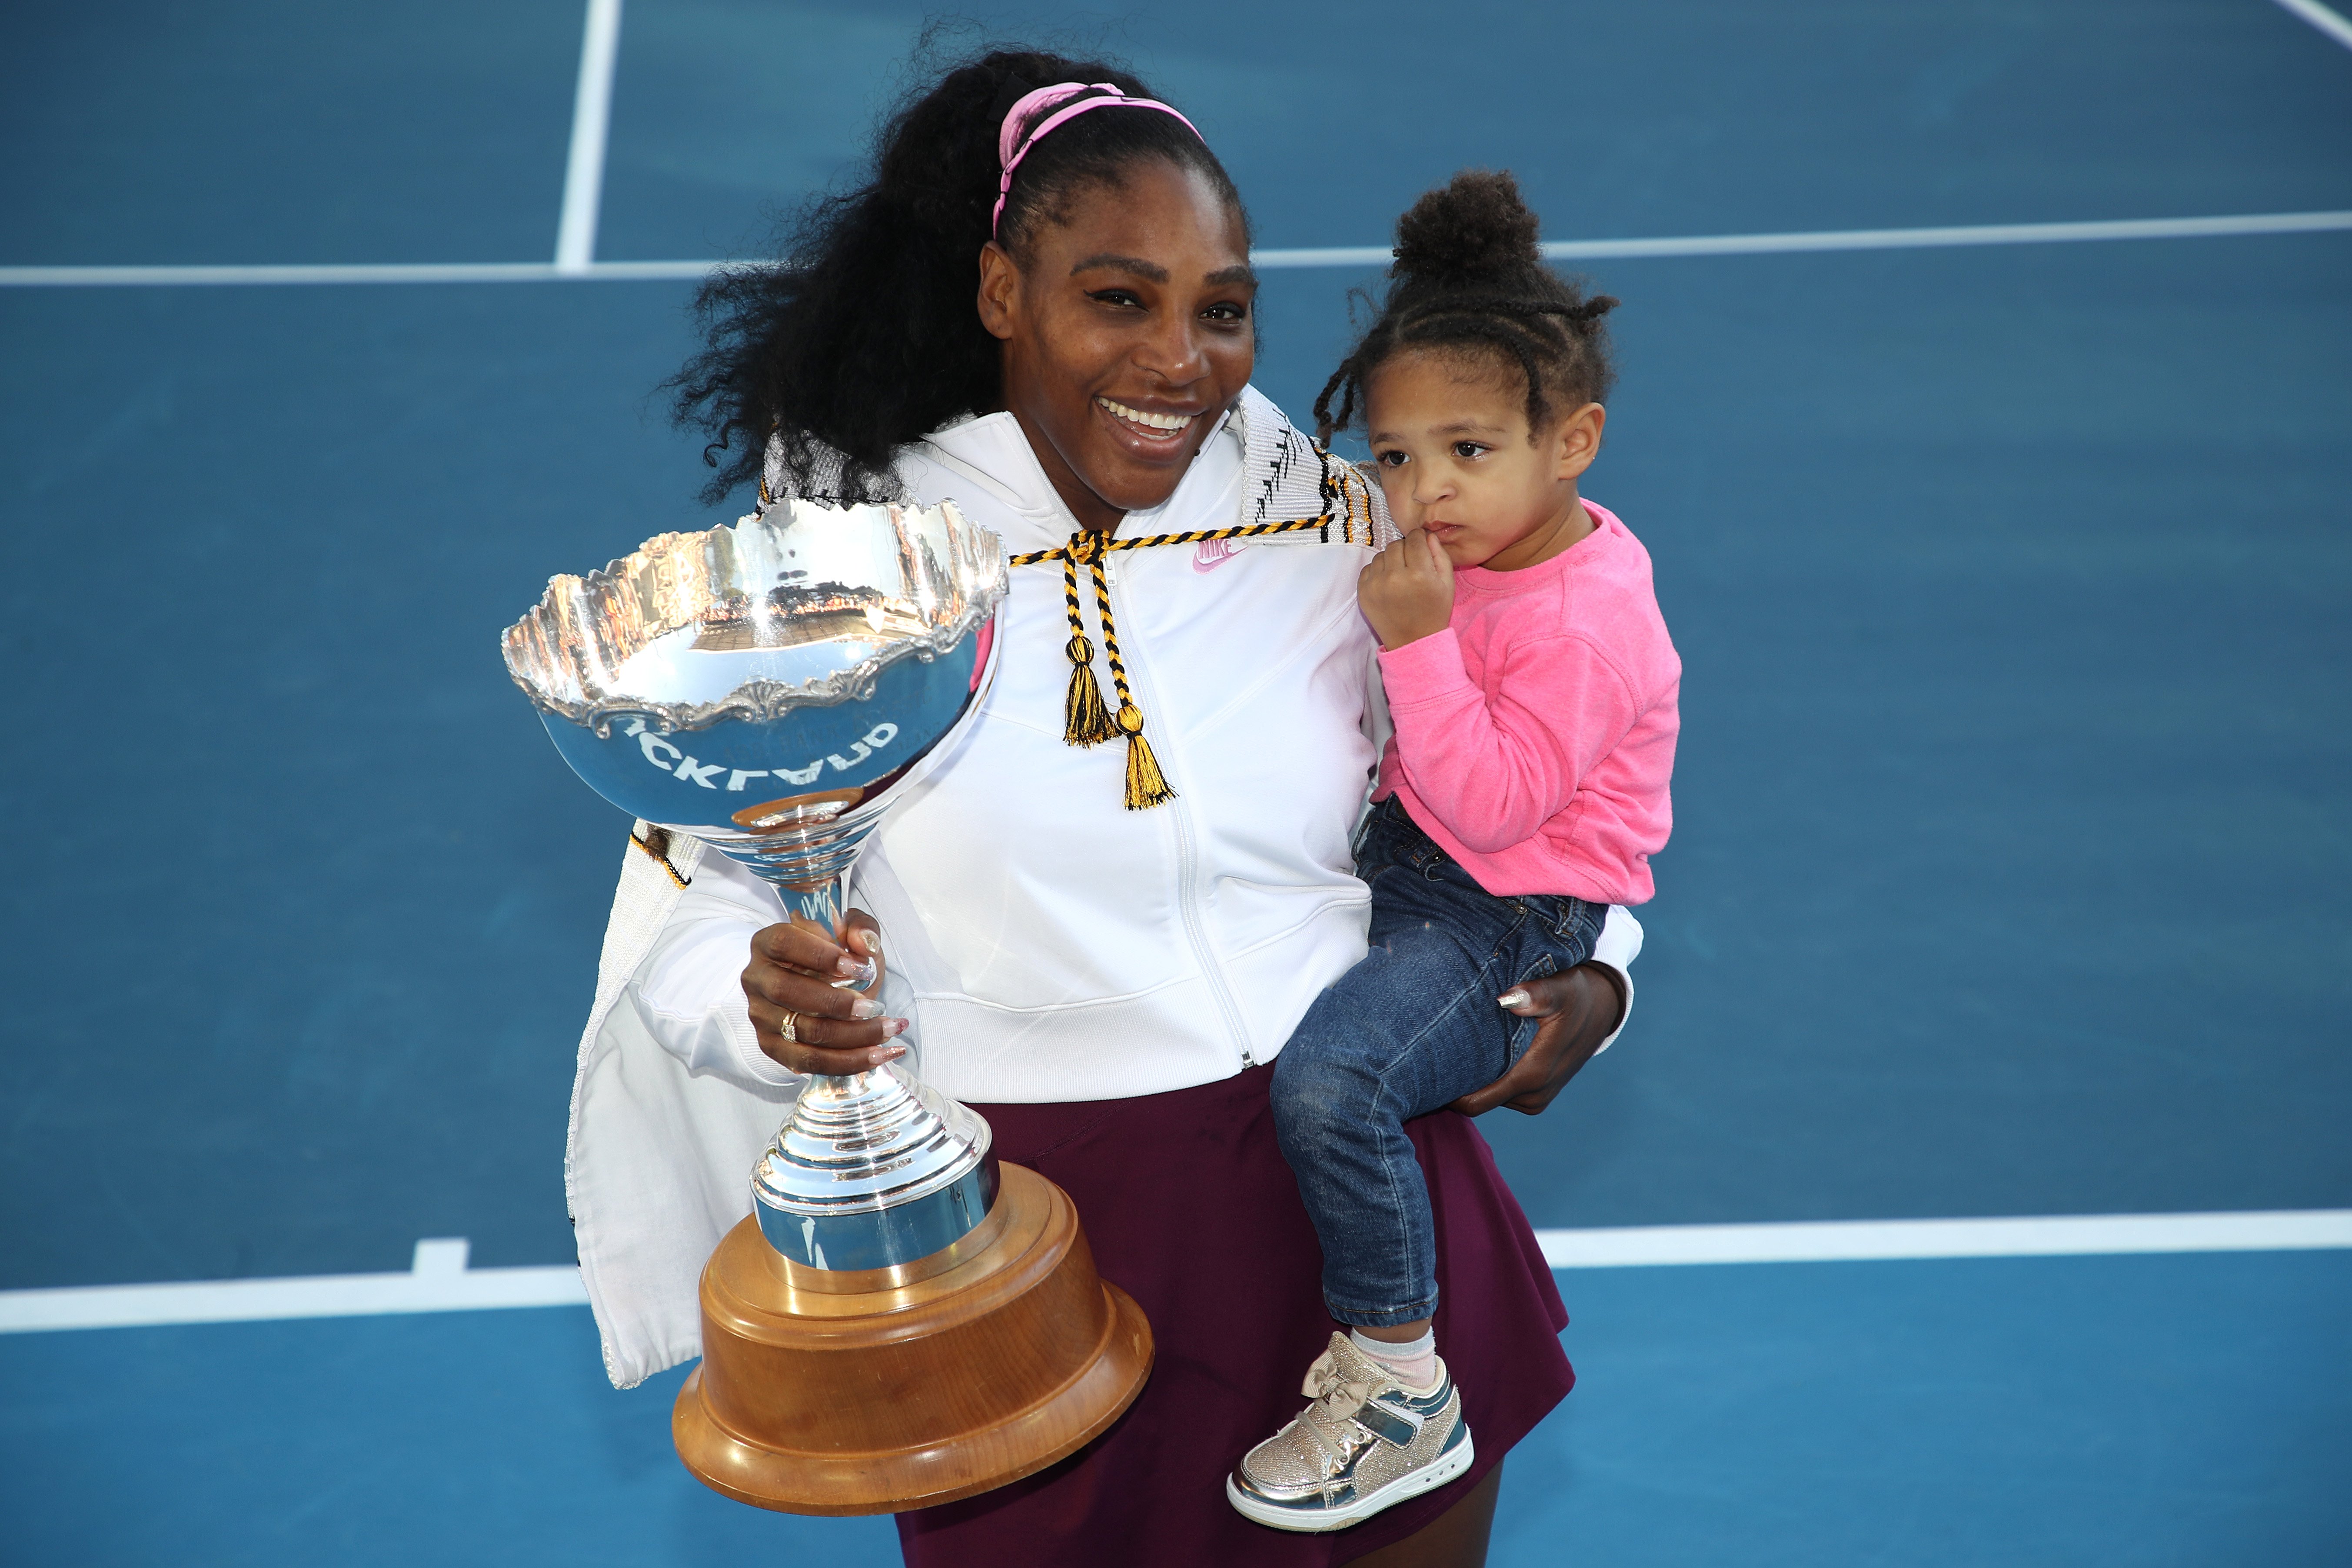 Serena Williams and her daughter Alexis Olympia at ASB Tennis Centre, 2020 in New Zealand | Source: Getty Images